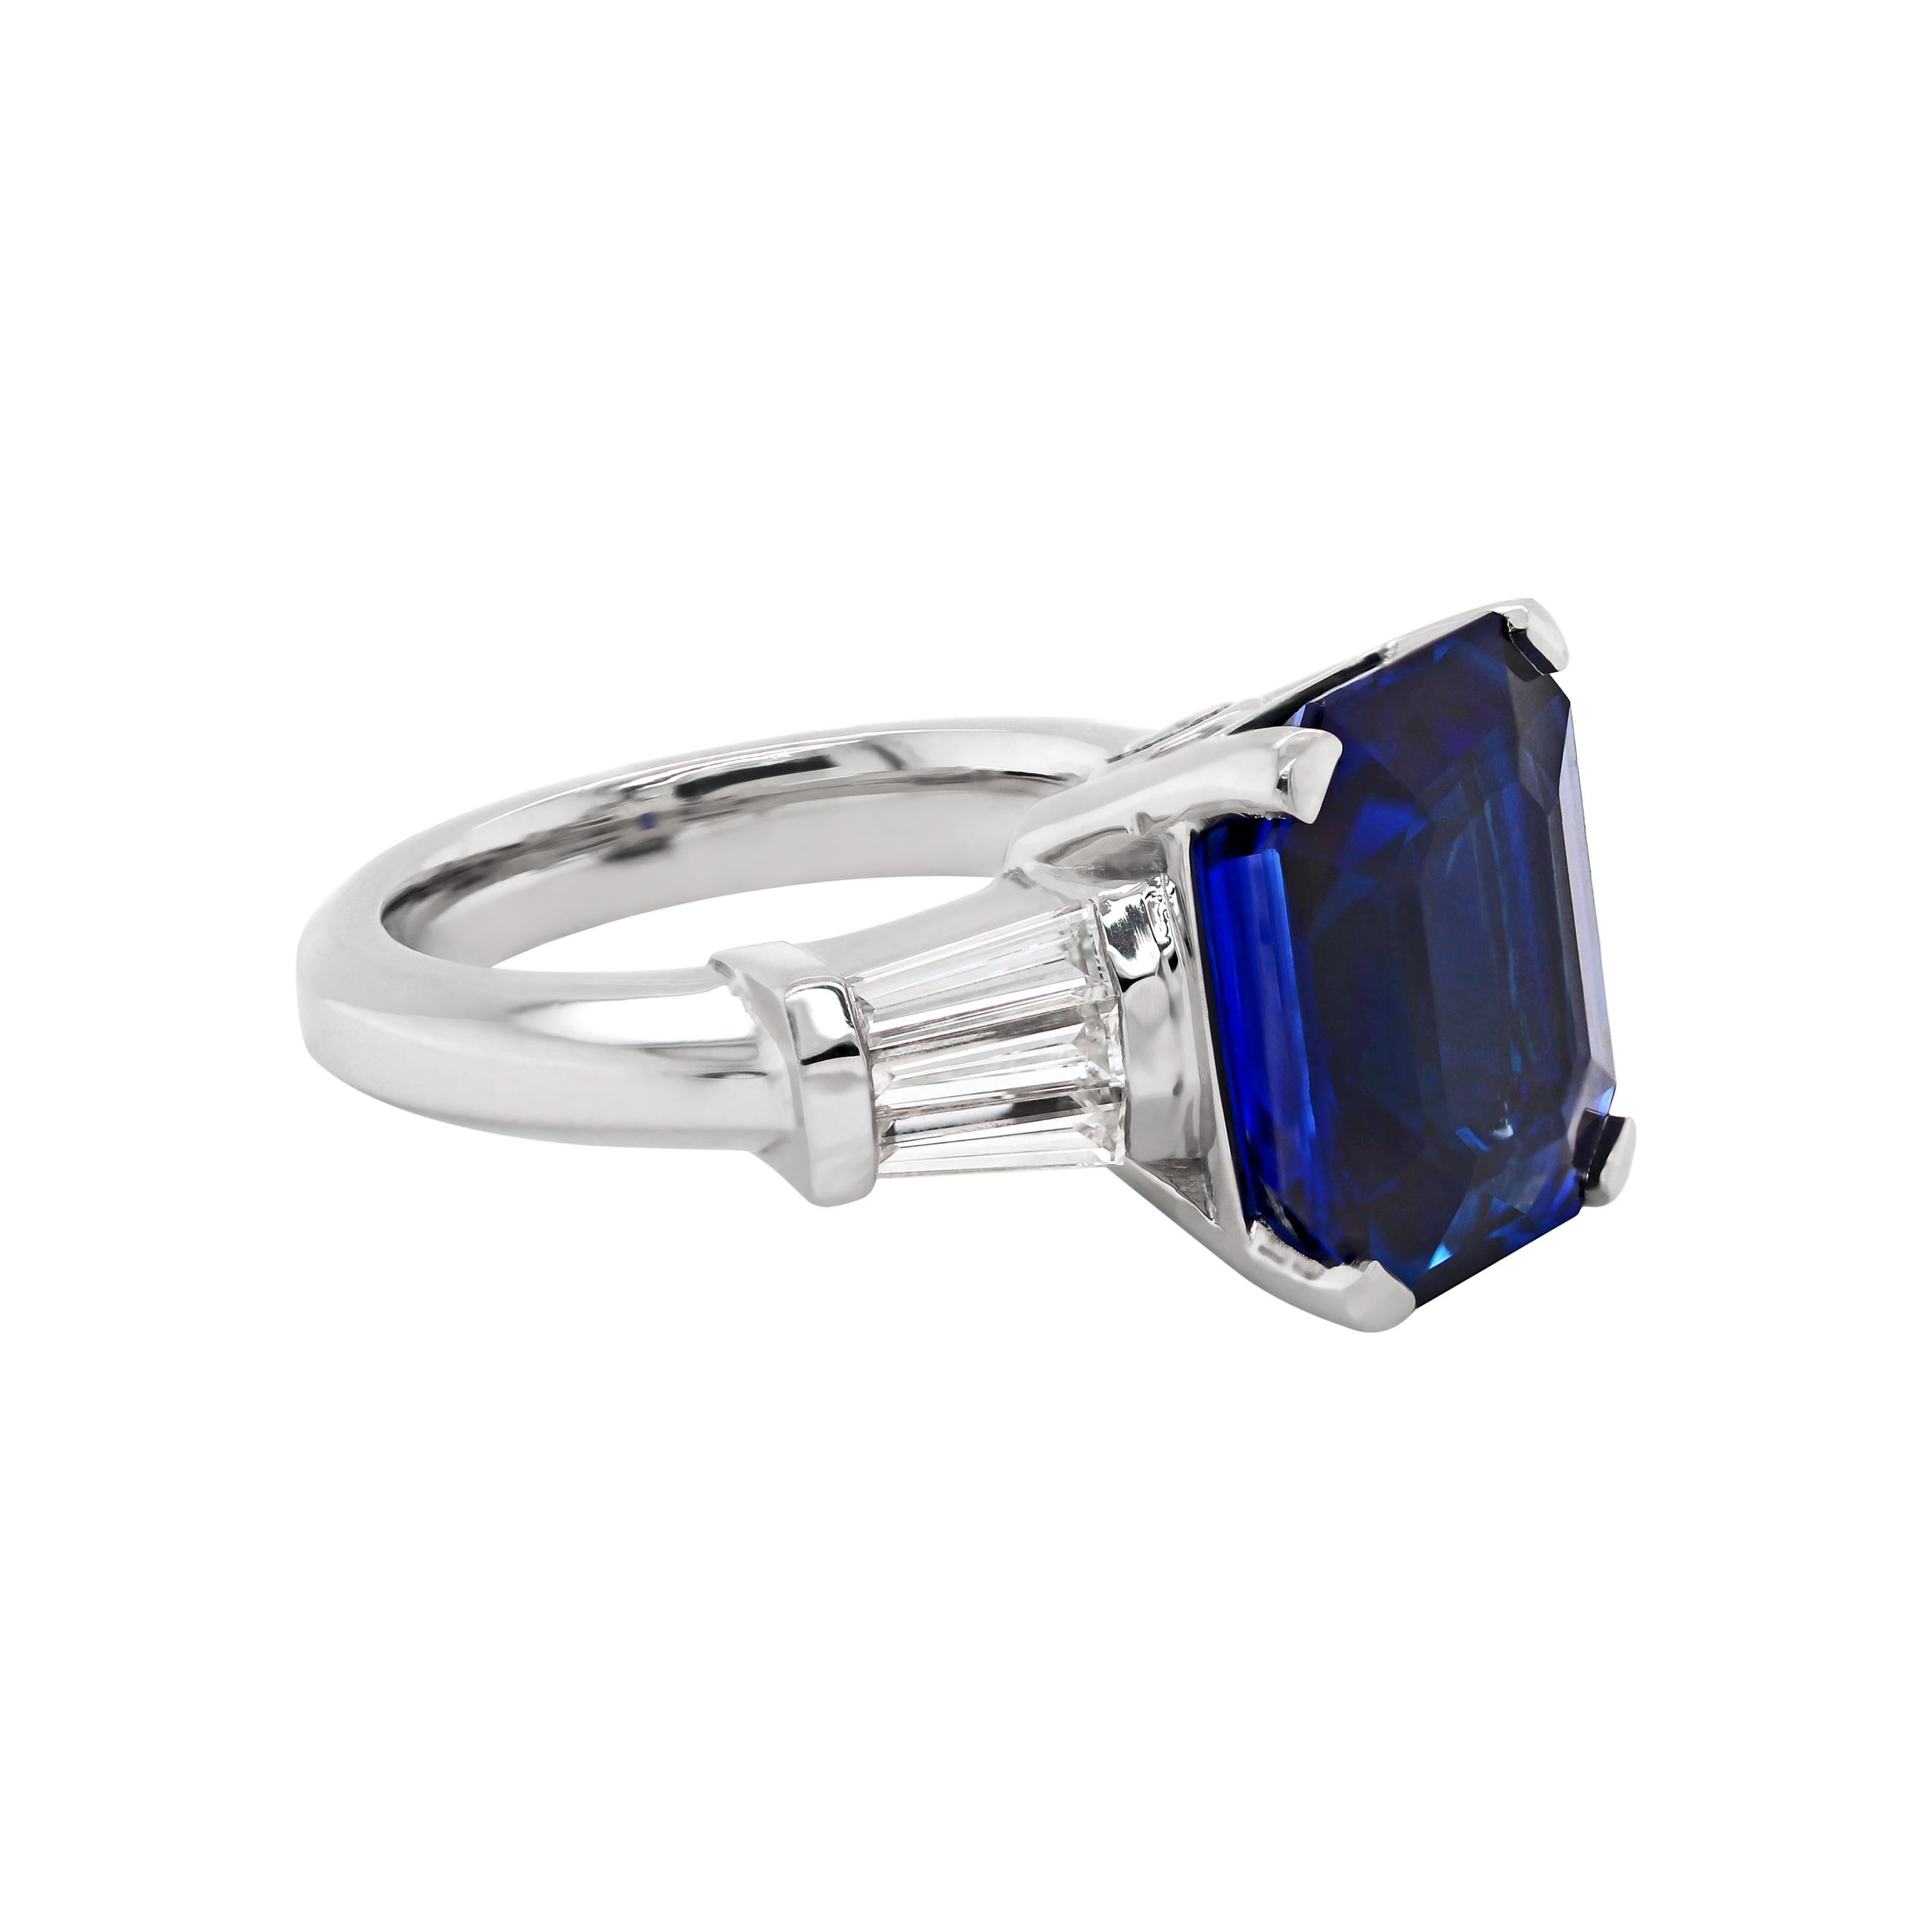 Exquisite engagement ring set with an emerald cut royal blue sapphire weighing an impressive 8.88 carats in a four claw open back setting. The sapphire is accompanied by three tapered baguette cut diamonds on each shoulder with a combined weight of